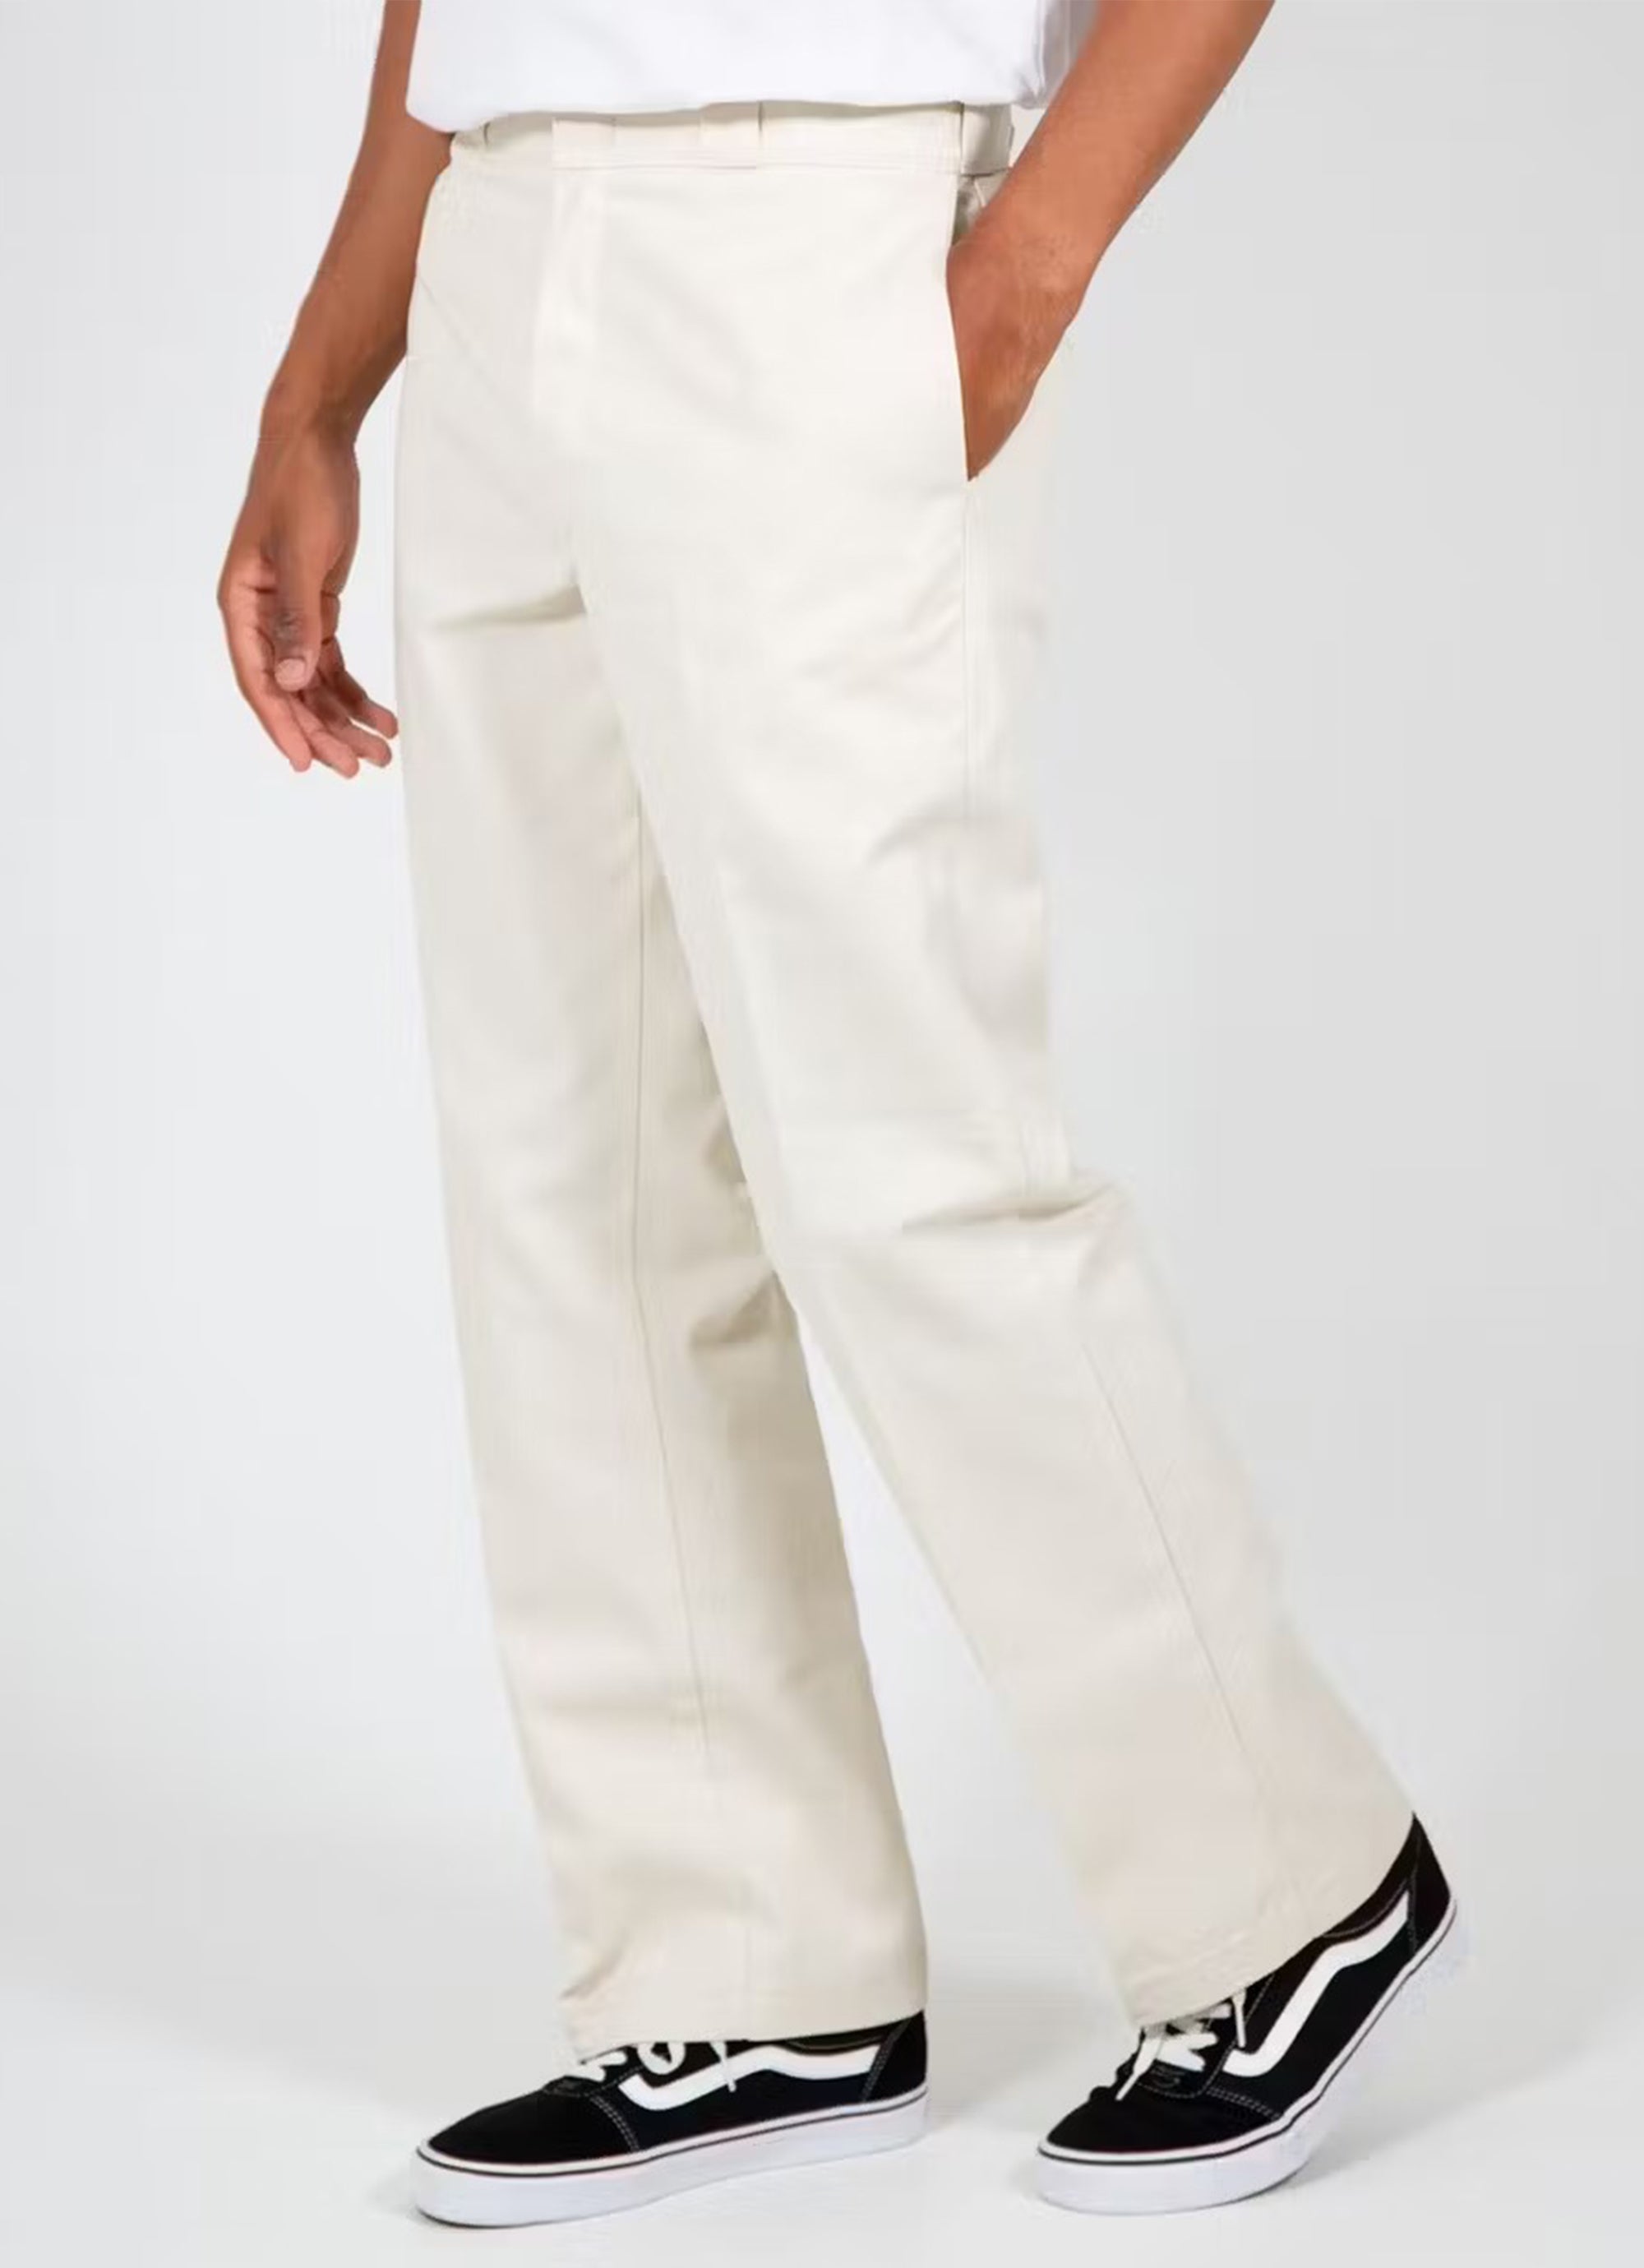 What are the best brands for mens dress pants  Quora